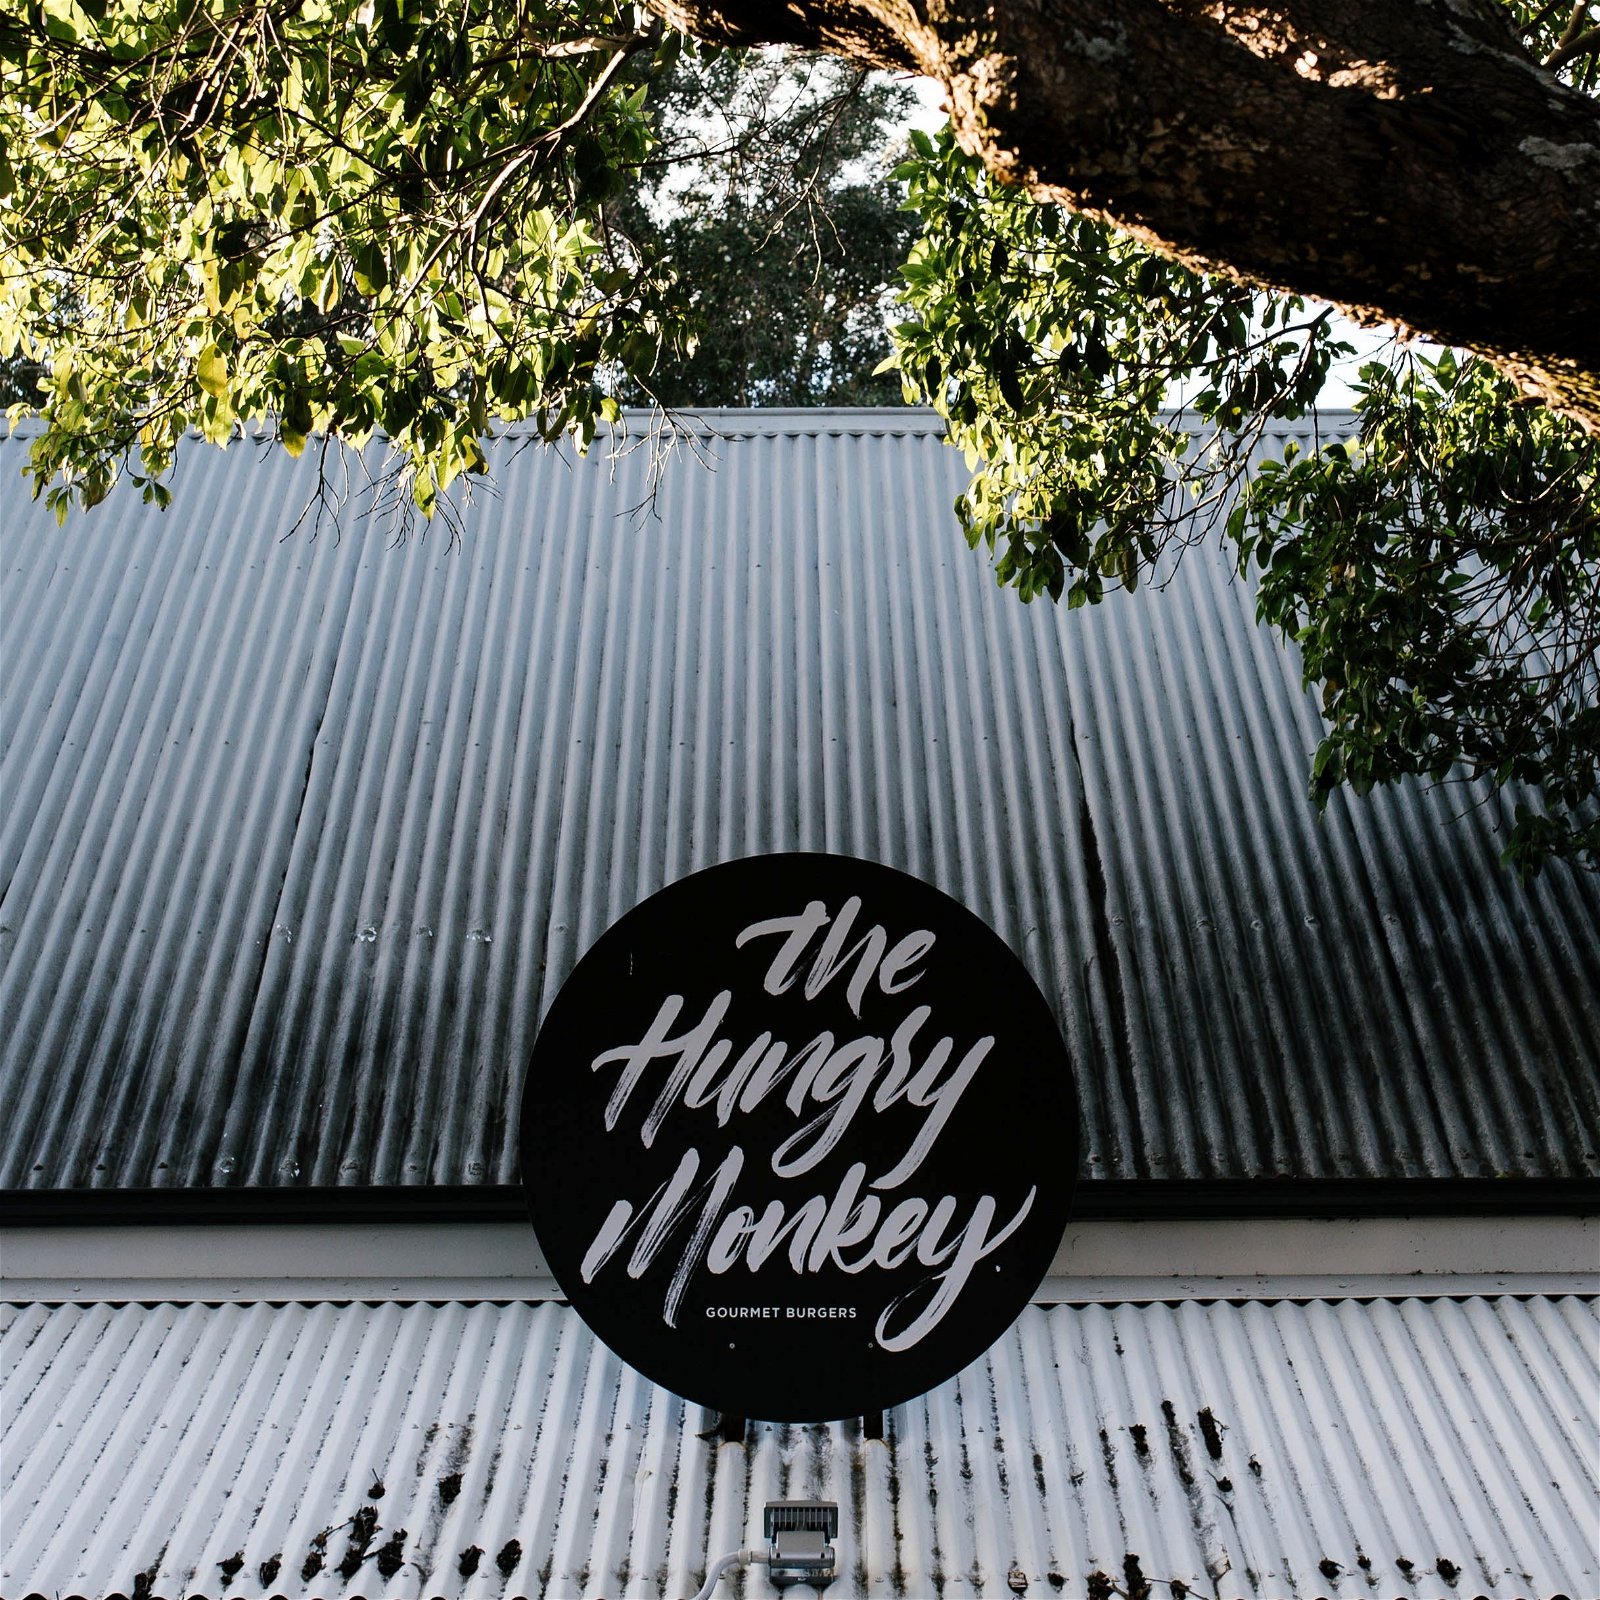 Hungry Monkey - Broome Tourism